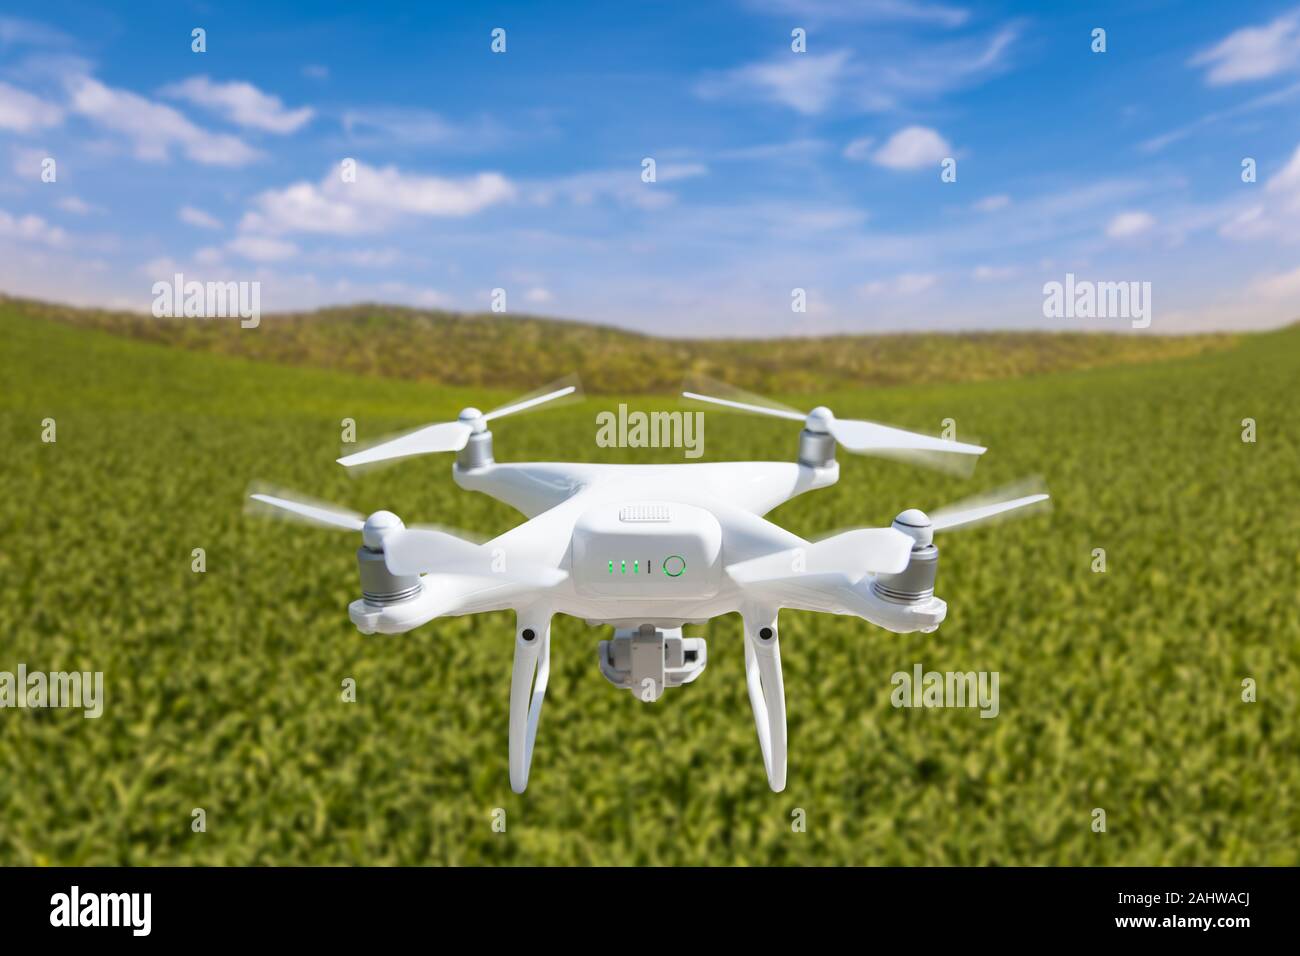 Aircraft Flying and Gathering Data Over Country Farmland Stock Photo - Alamy